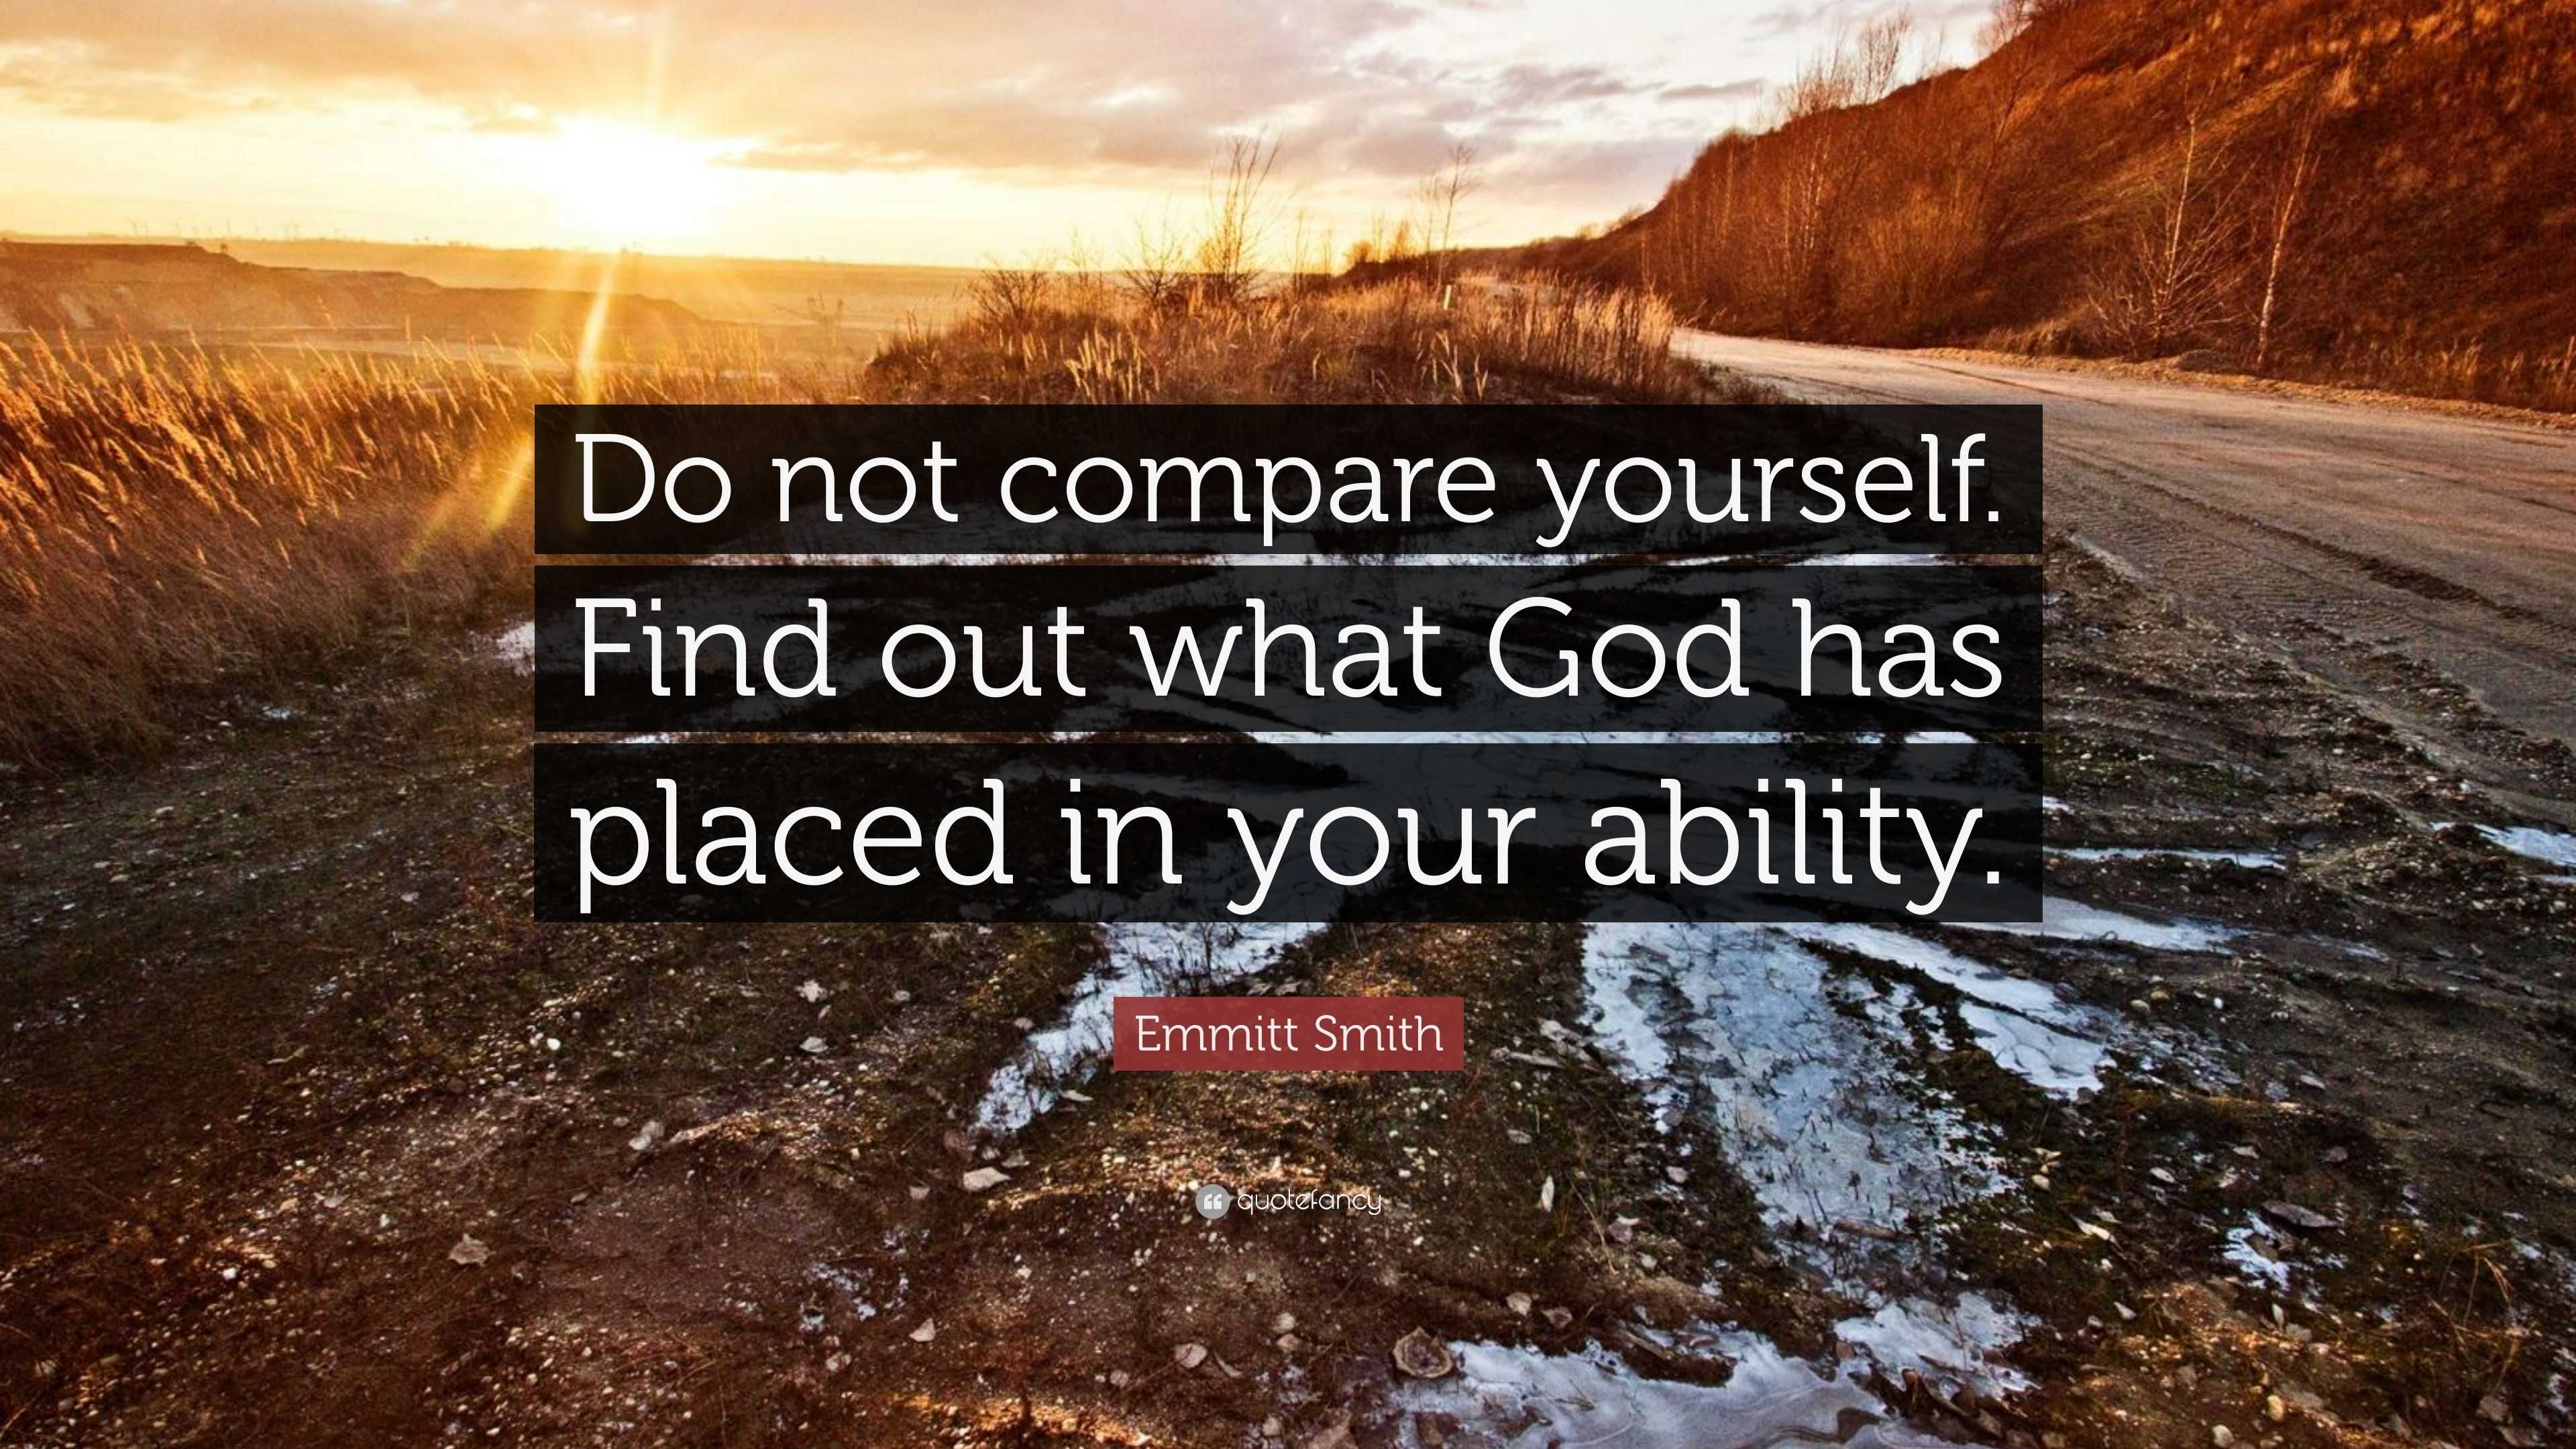 Emmitt Smith Quote: “Do not compare yourself. Find out what God has ...